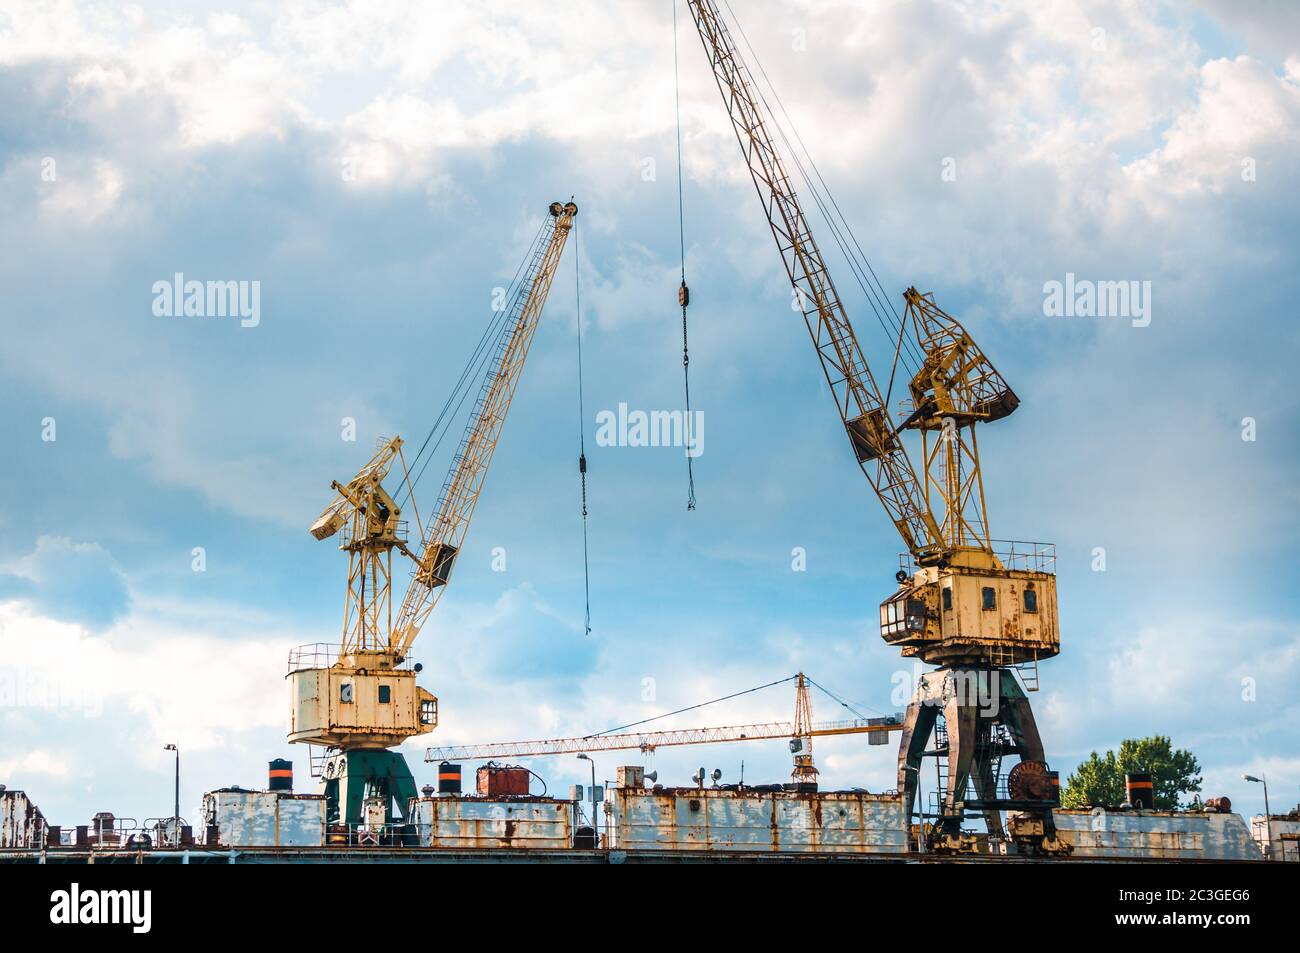 Two rusty abandoned cargo cranes in the city old industrial area Stock Photo